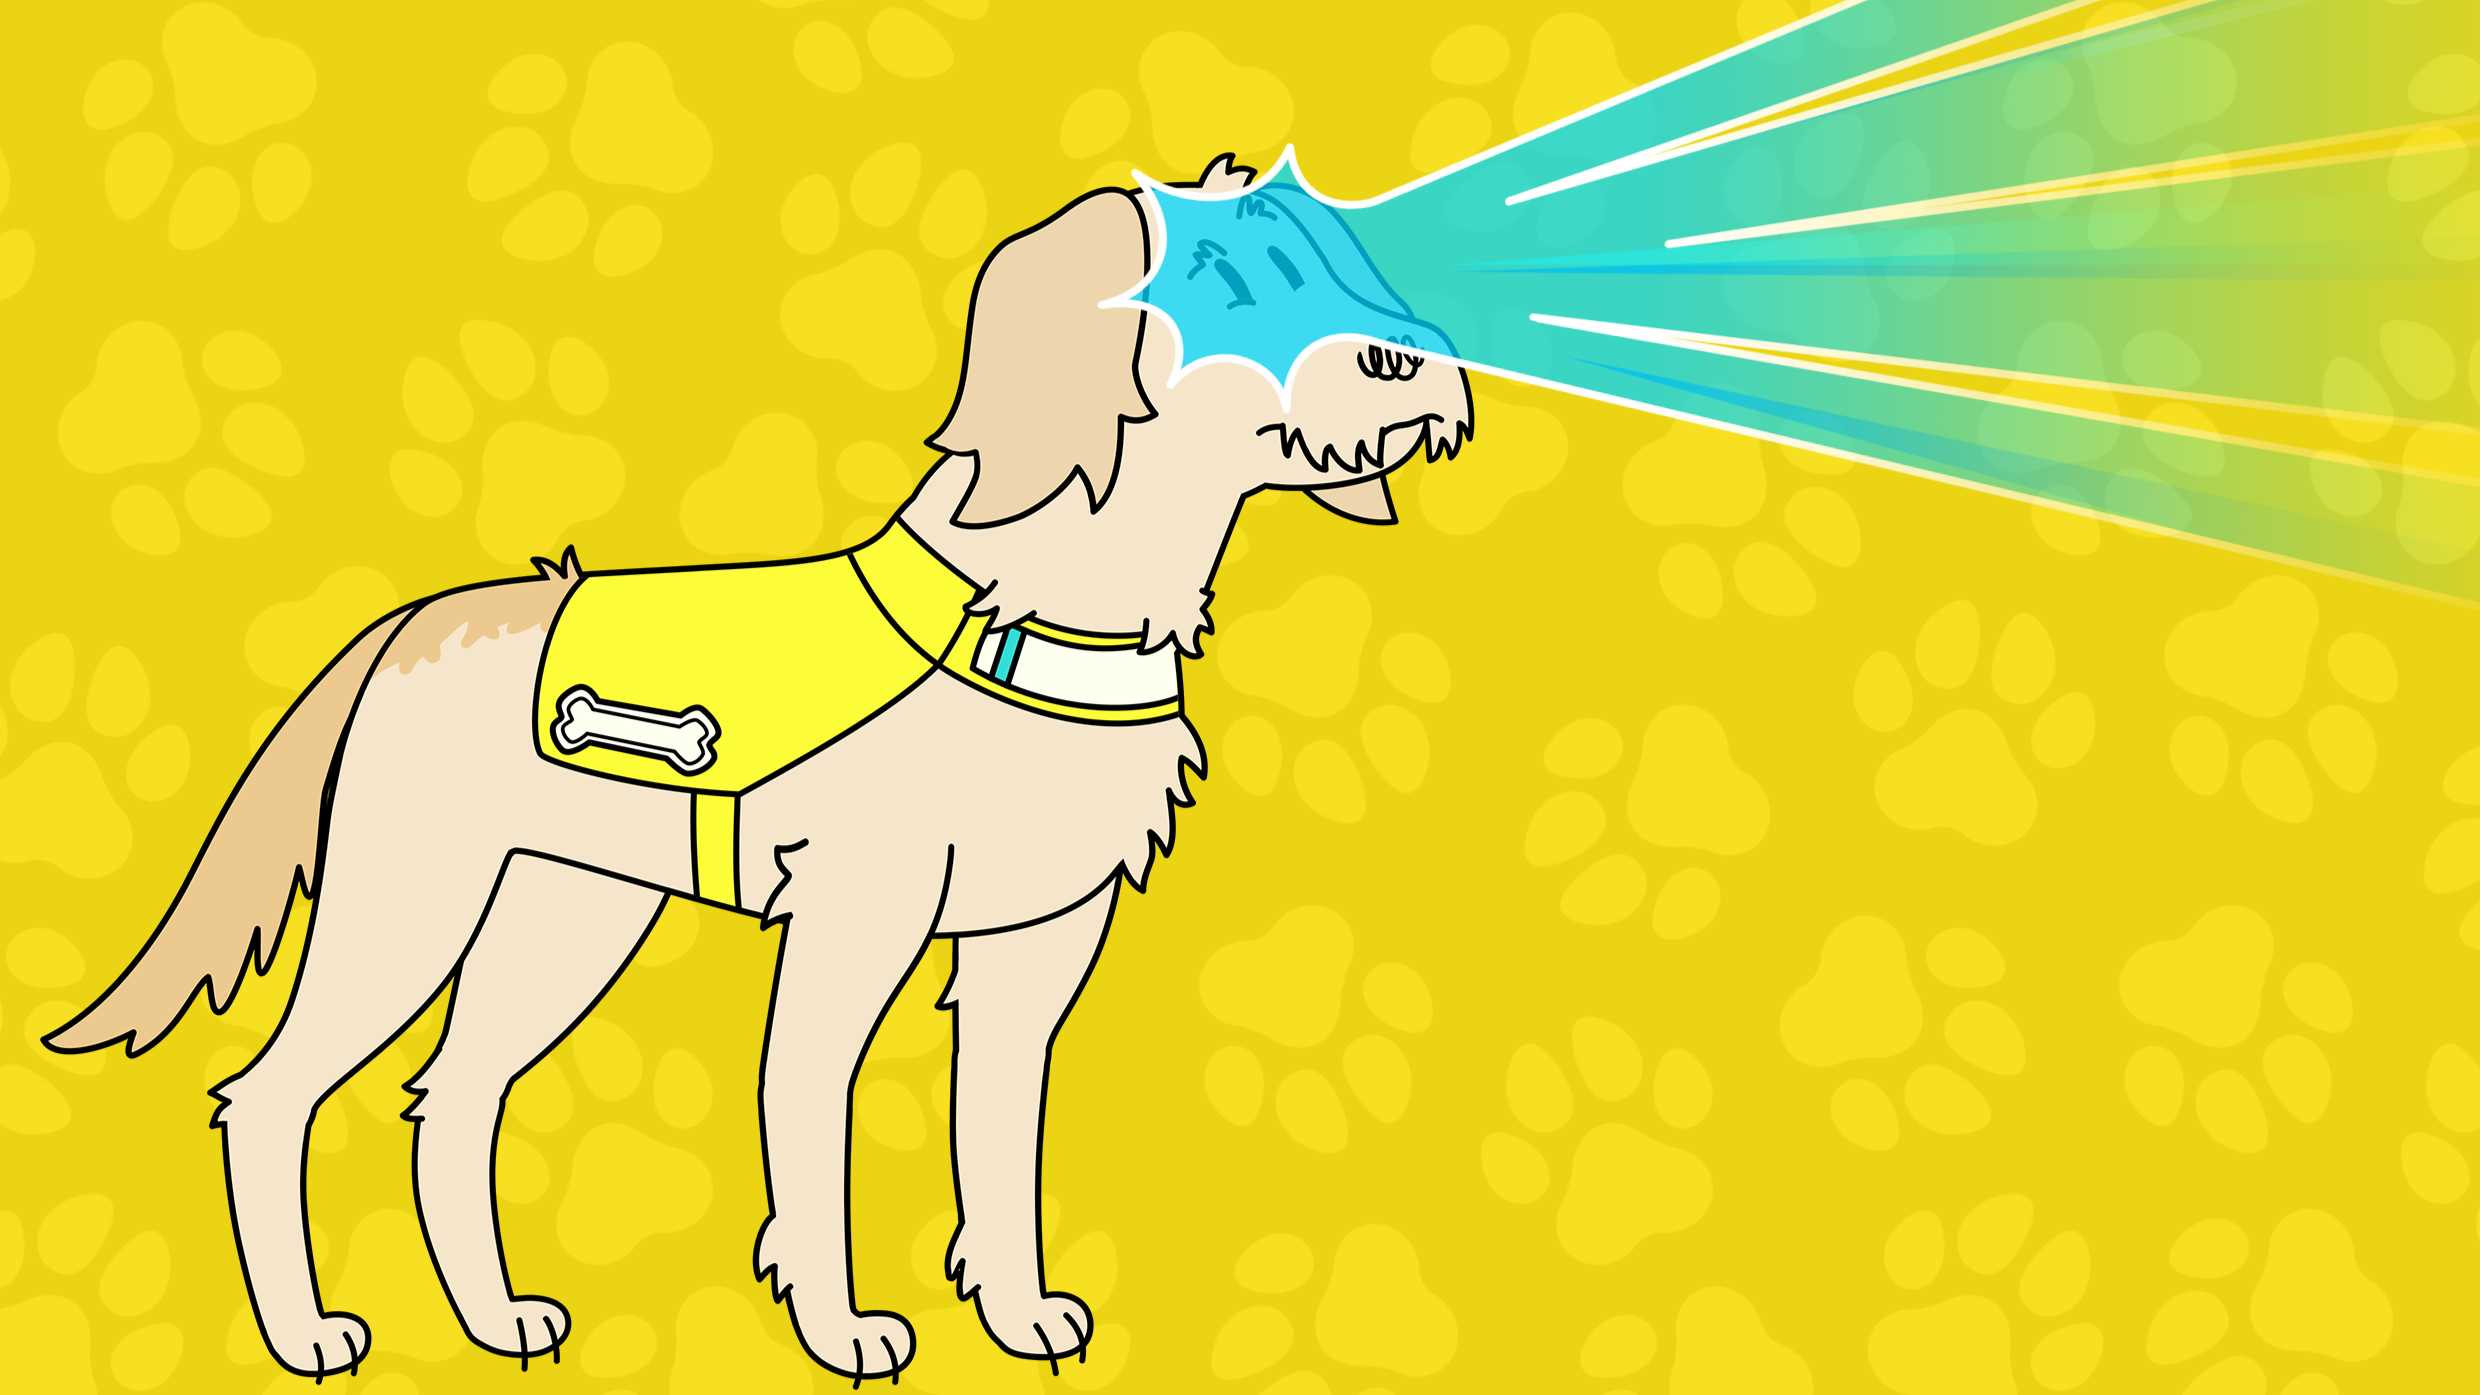 An animation of cream Labradoodle Piran for CBeebies' Dog Squad TV show. Cartoon Piran wears a yellow coat and has blue beams of super sight coming from his eyes.